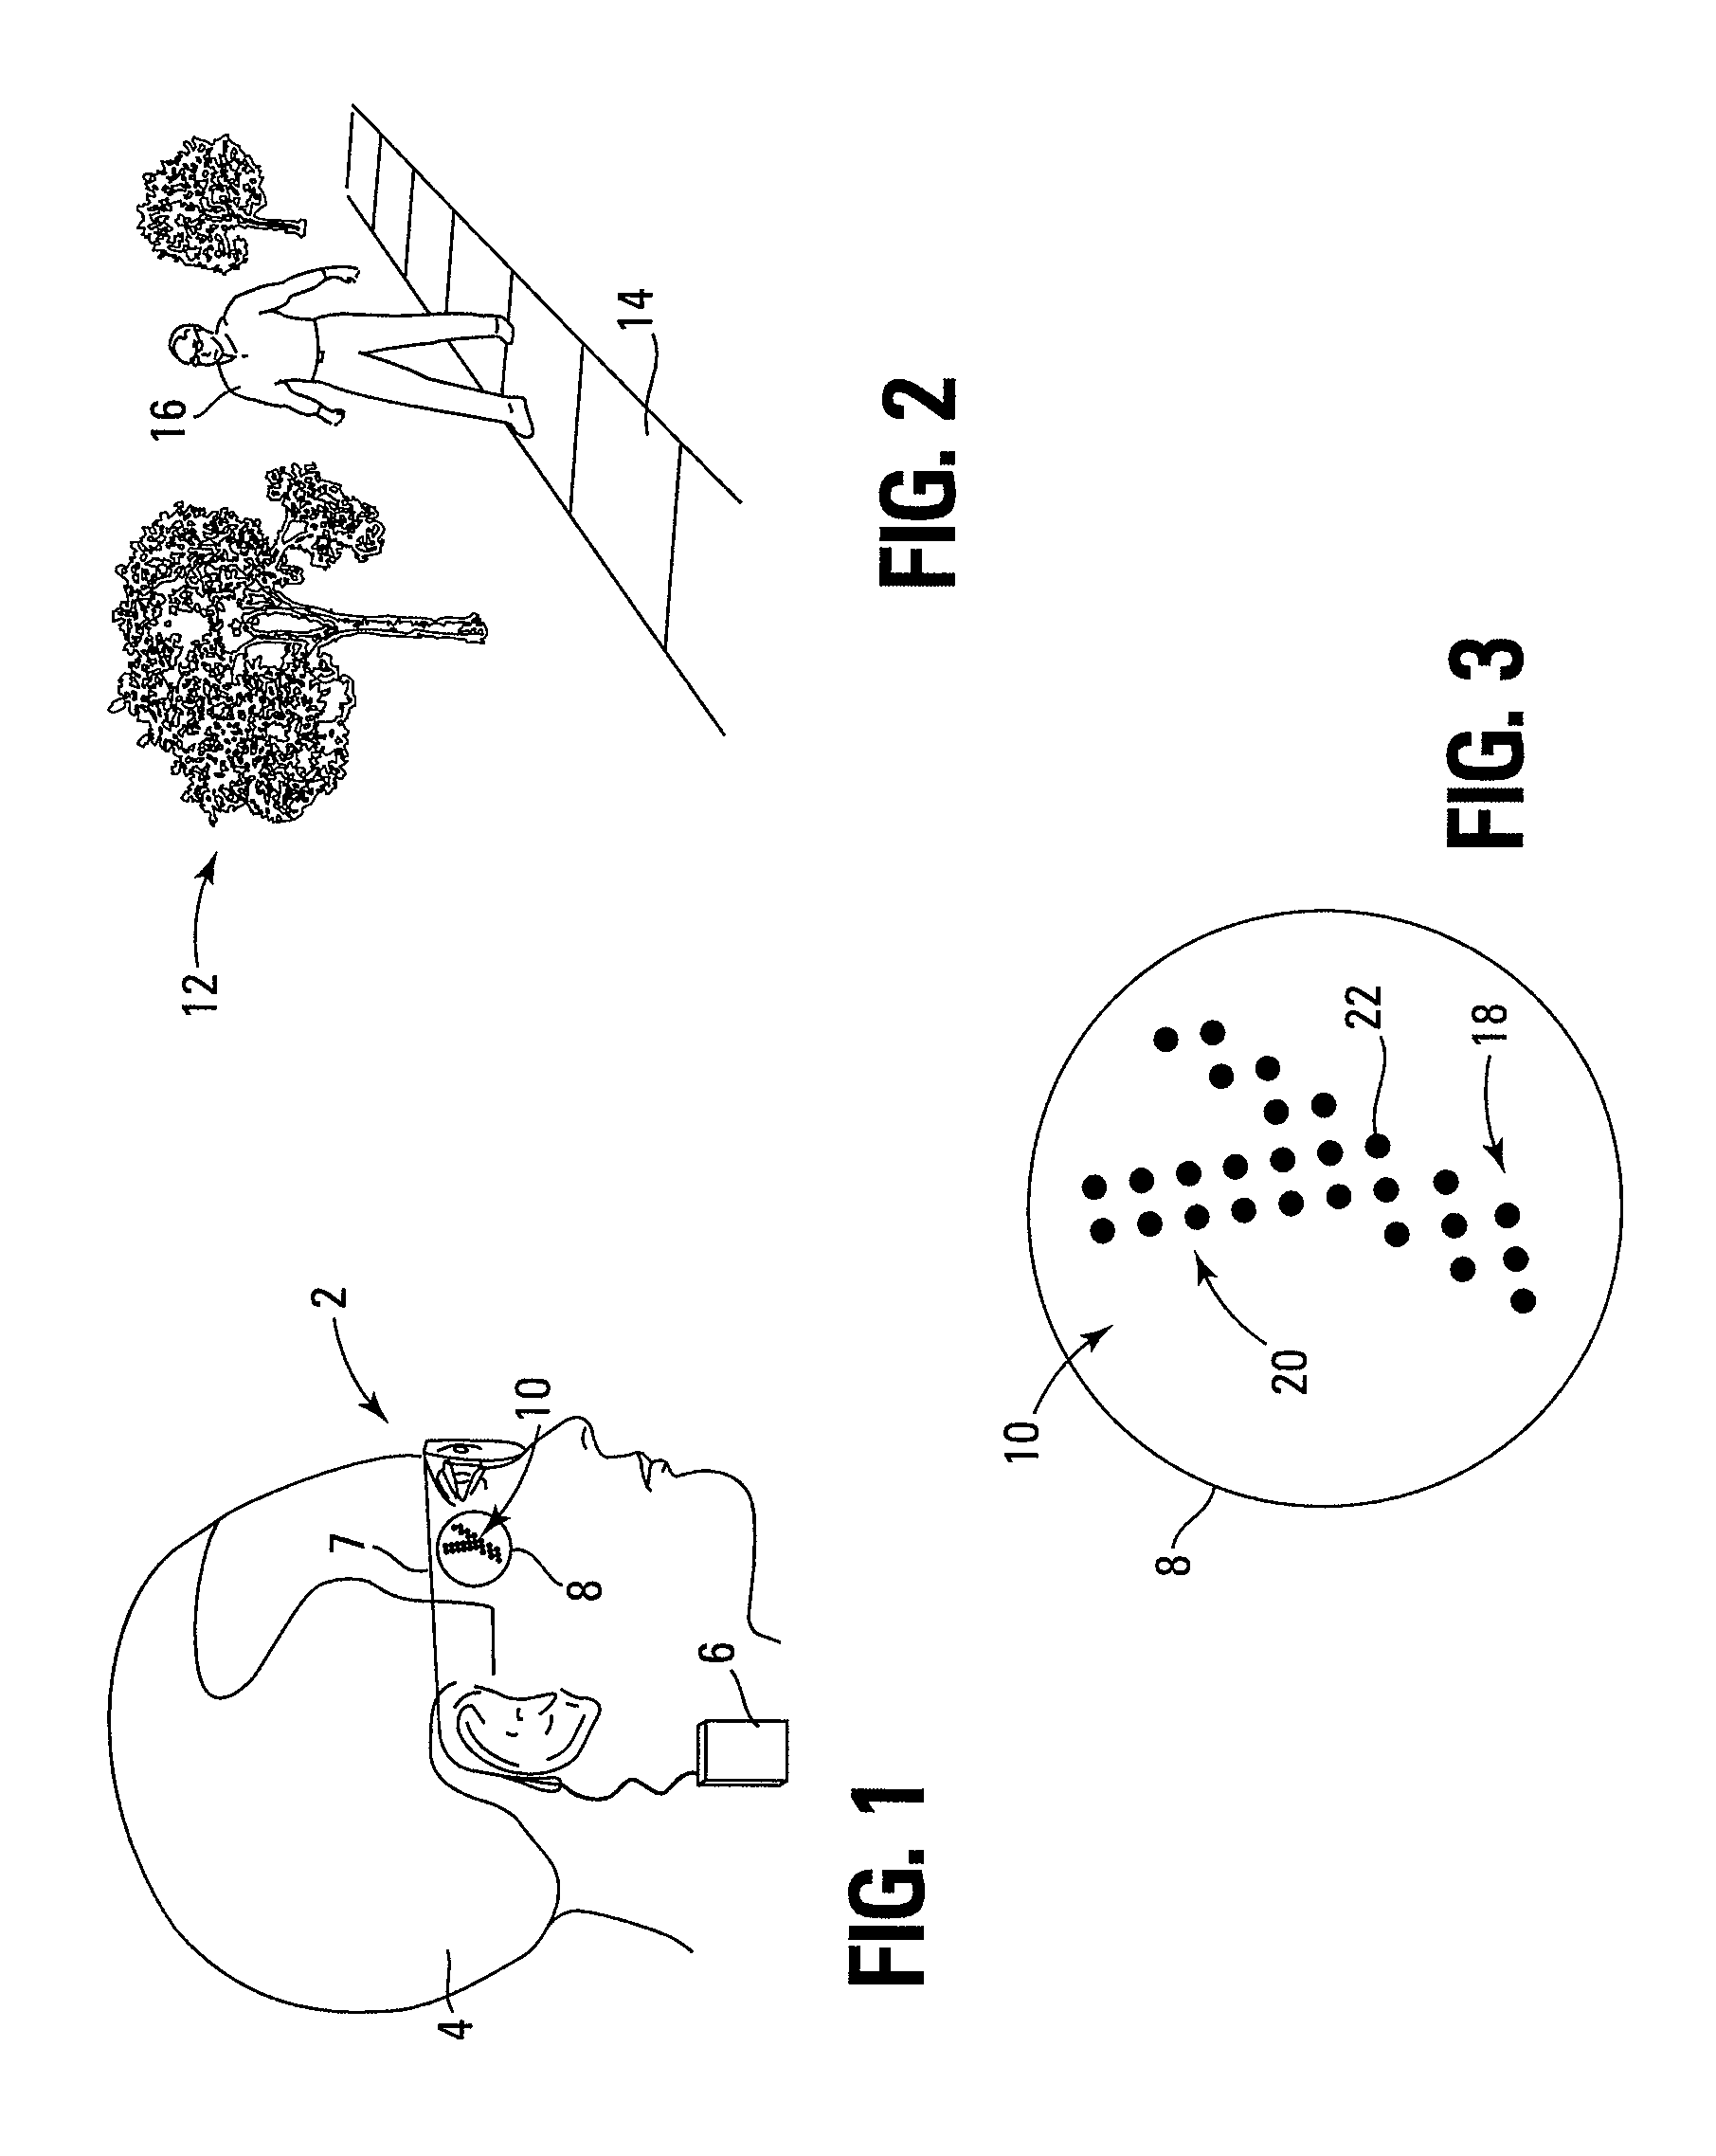 Method and apparatus for sensory substitution, vision prosthesis, or low-vision enhancement utilizing thermal sensing